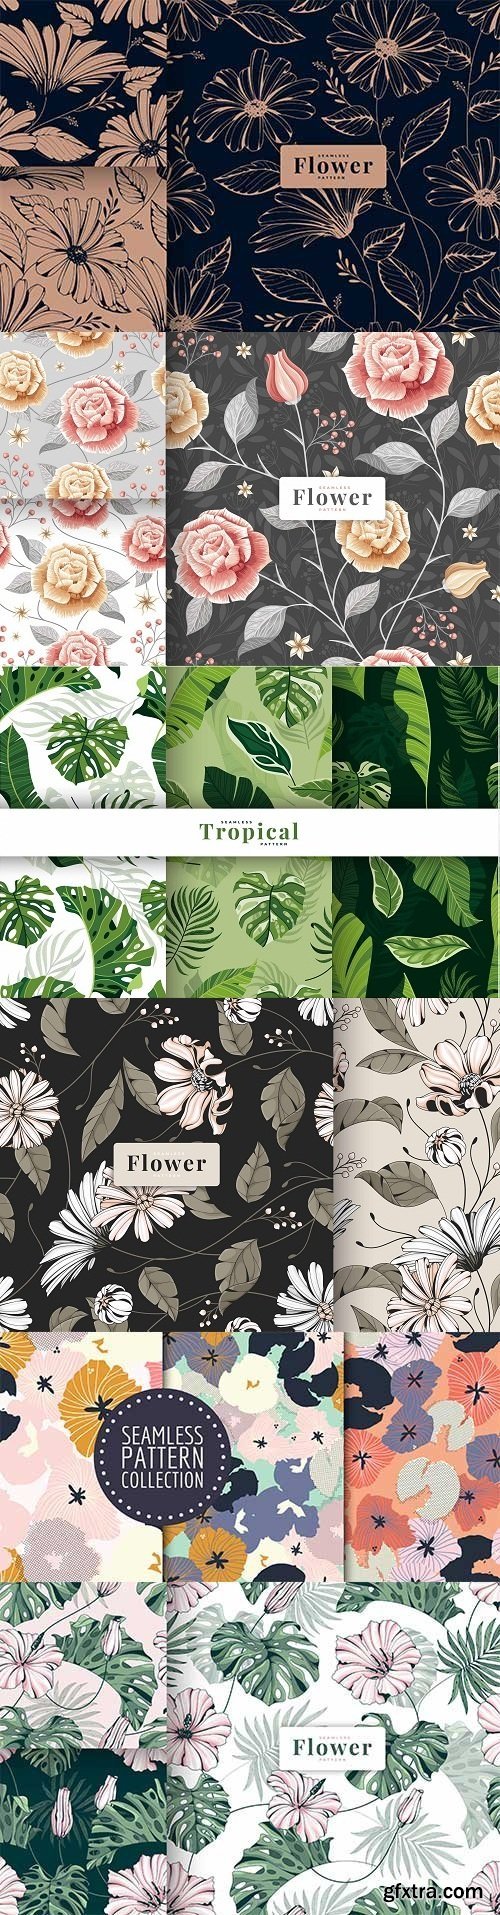 Collection hand drawn vintage floral seamless pattern